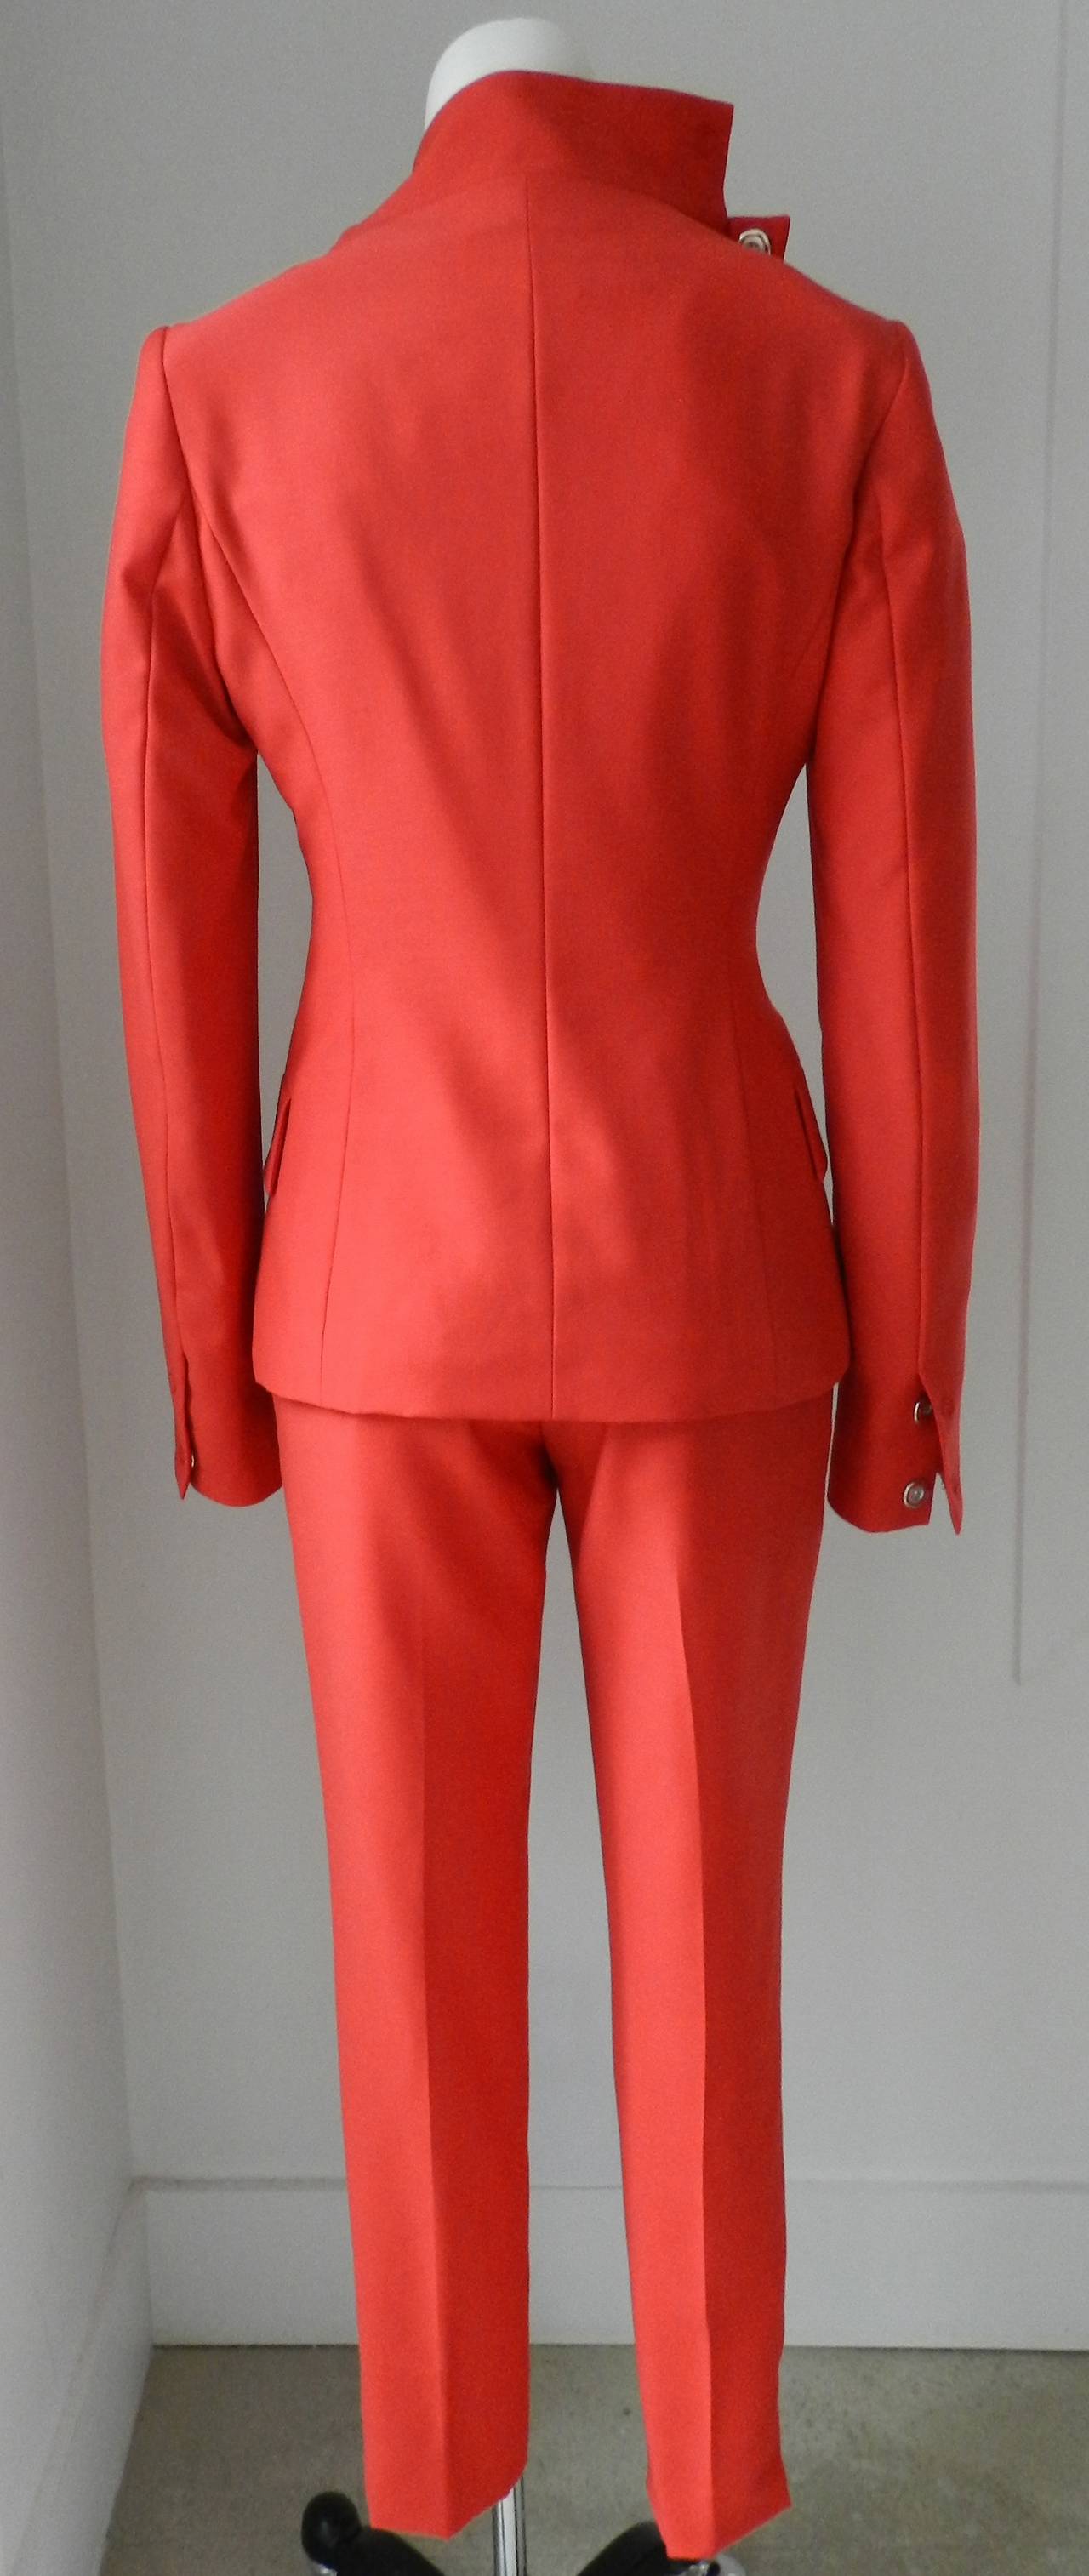 Women's Maison Martin Margiela Wool and Satin Red Pant Suit